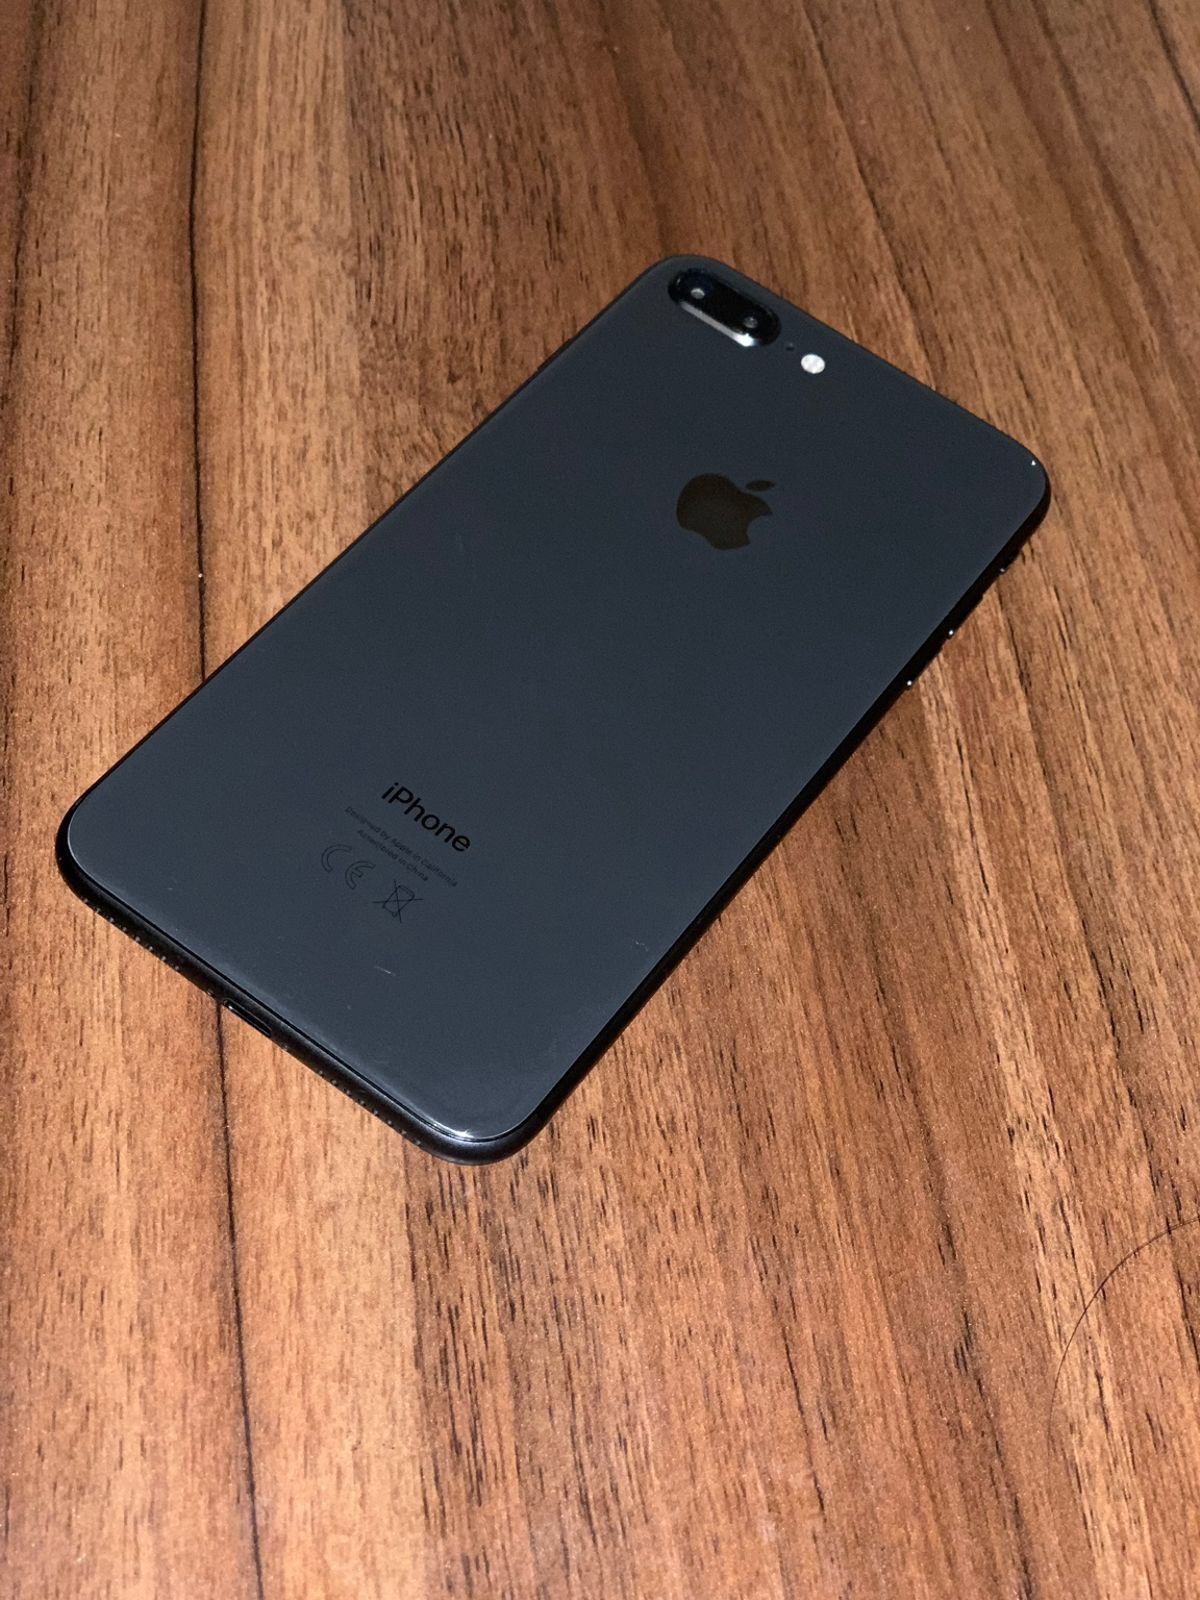 Apple iPhone 8 Plus 64gb unlocked any carrier